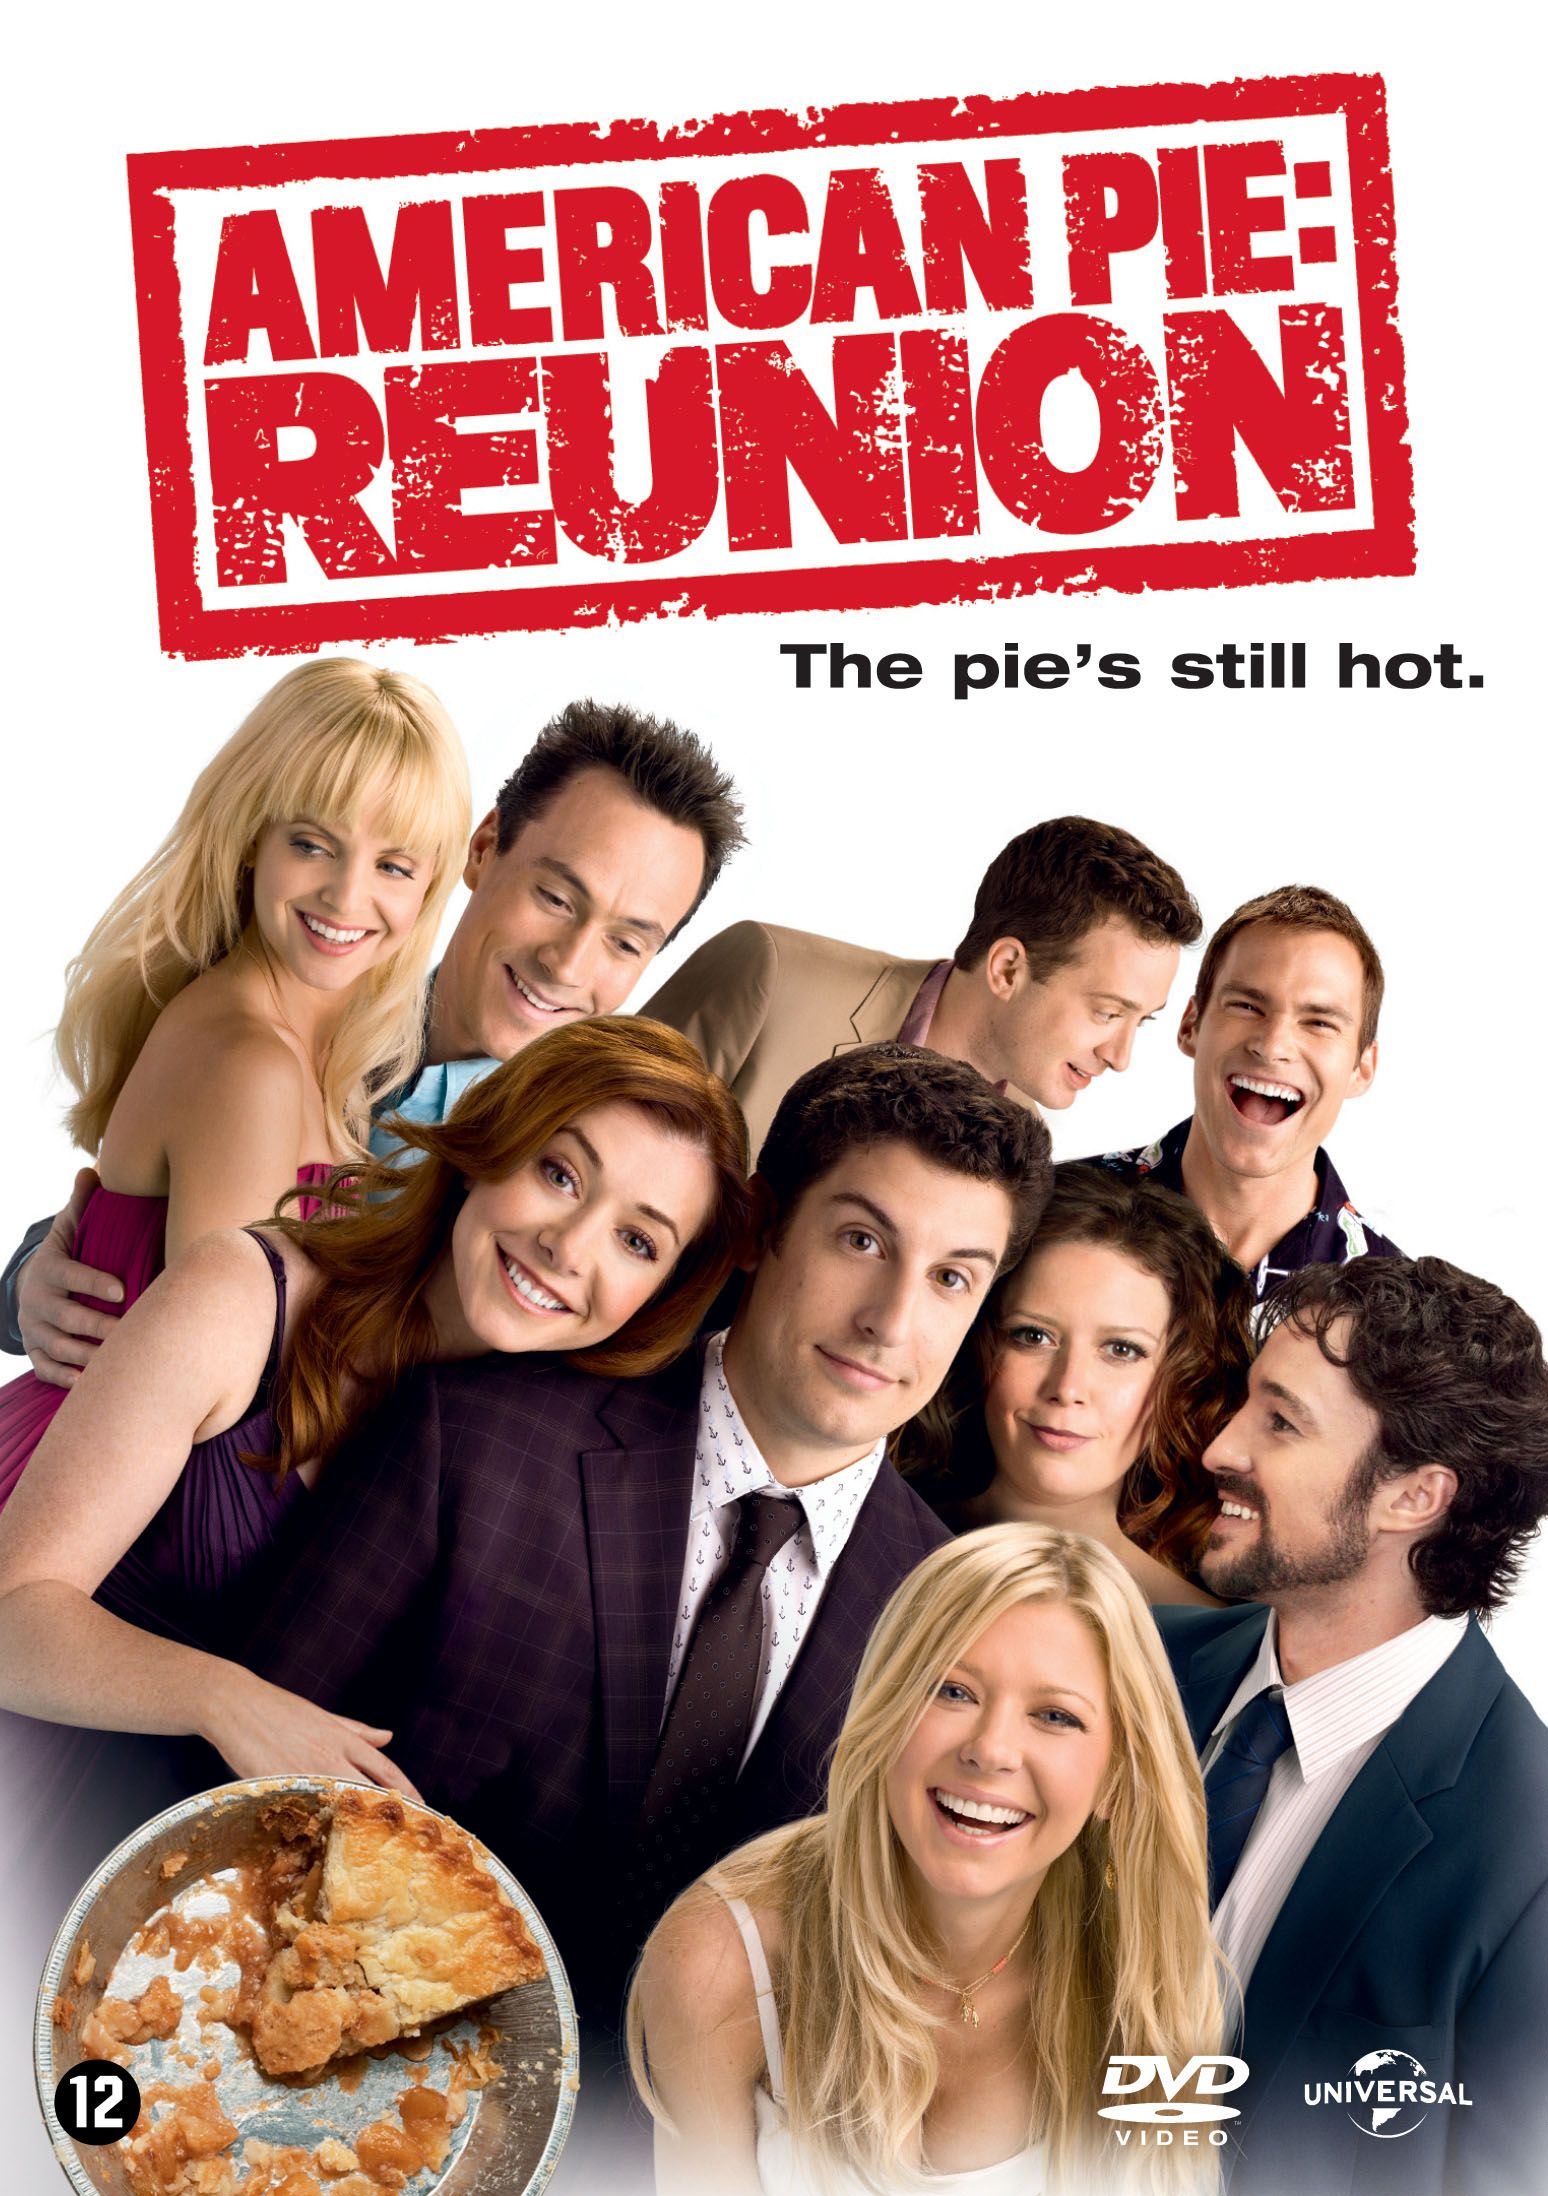 American pie reunion 2018 unrated 720p brrip x264 english ...